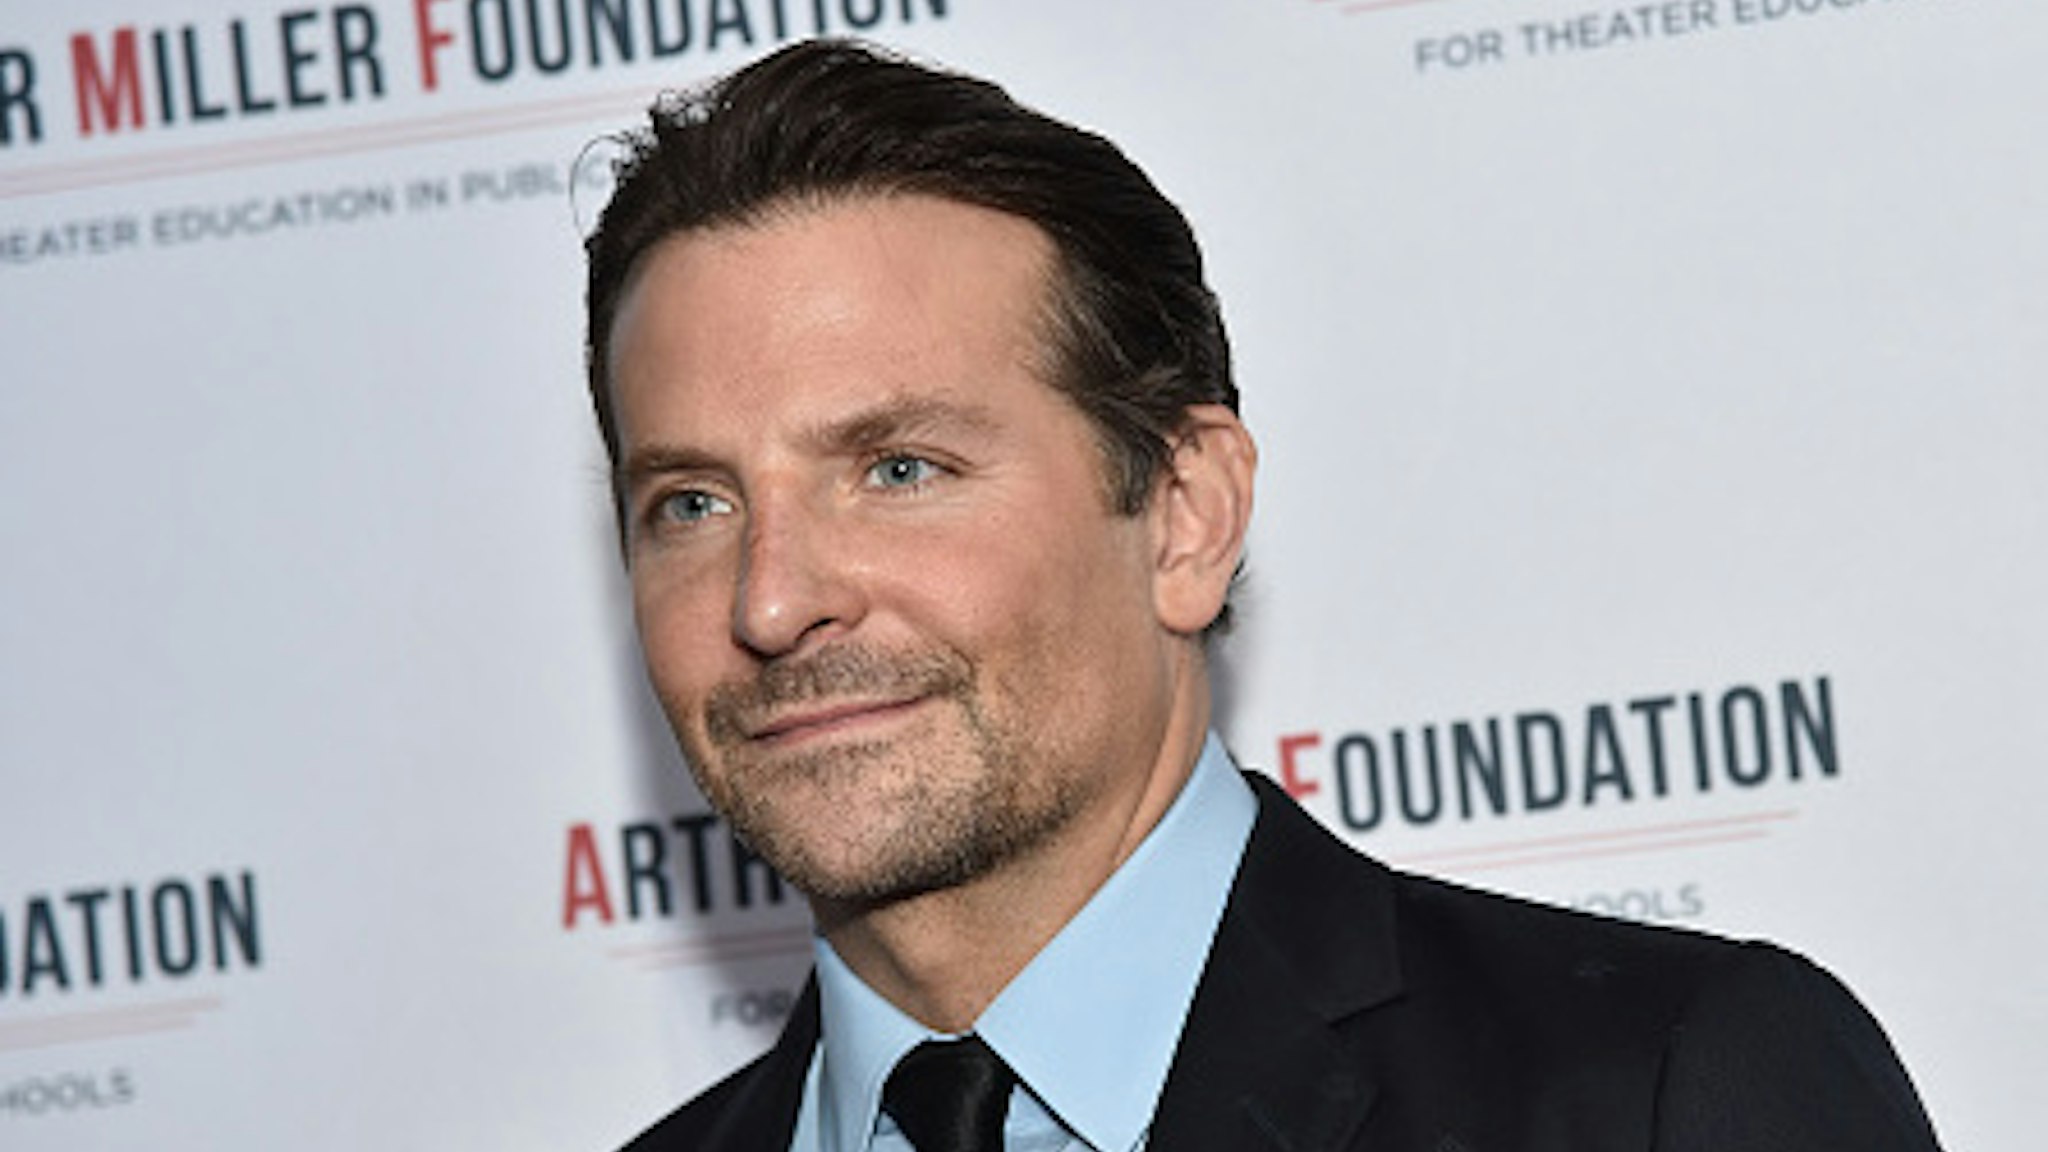 Bradley Cooper attends the 2019 Arthur Miller Foundation Honors at Kimpton Hotel on November 18, 2019 in New York City. (Photo by Steven Ferdman/Getty Images)